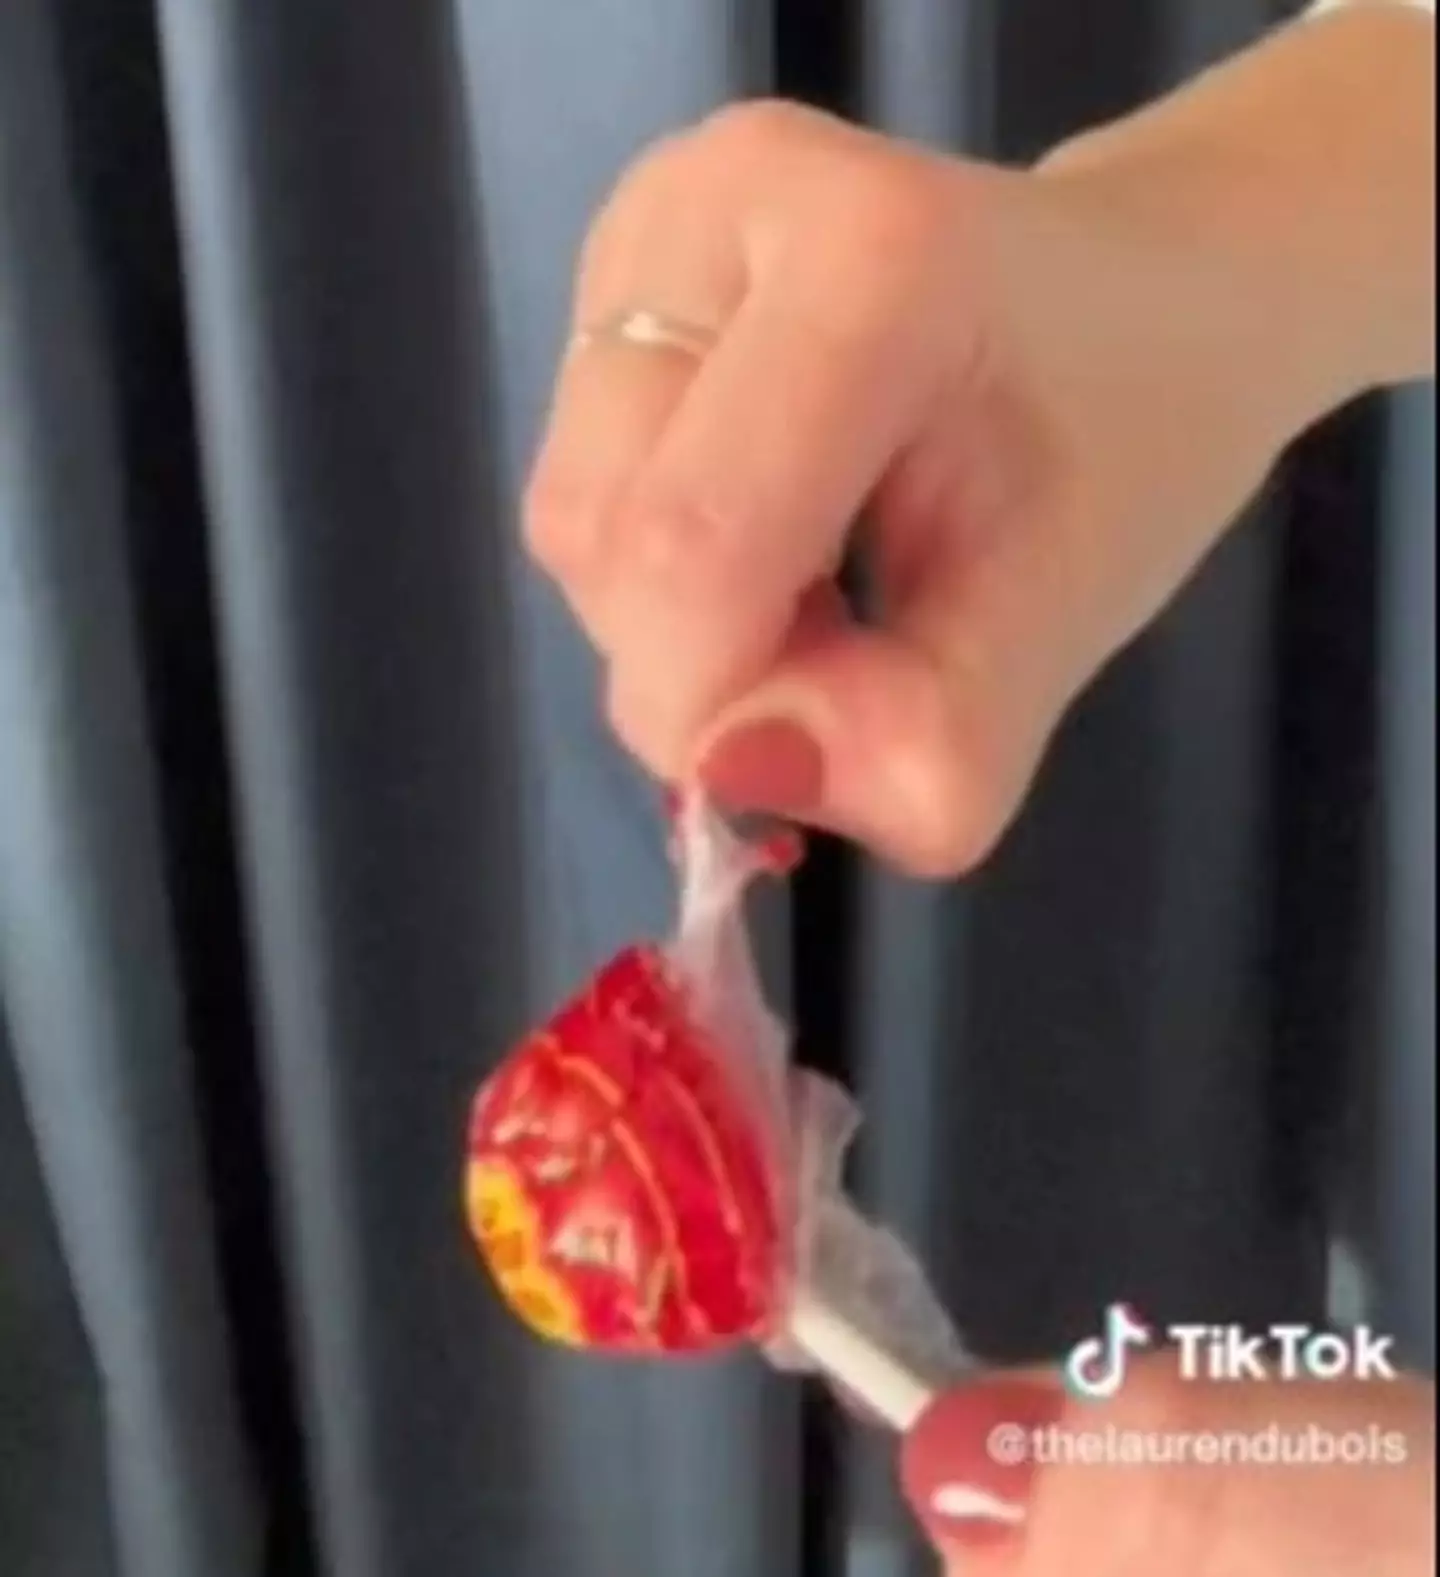 Chupa Chups are relatively easy to open - once you know how to do it. Credt: TikTok/@thelaurendubois